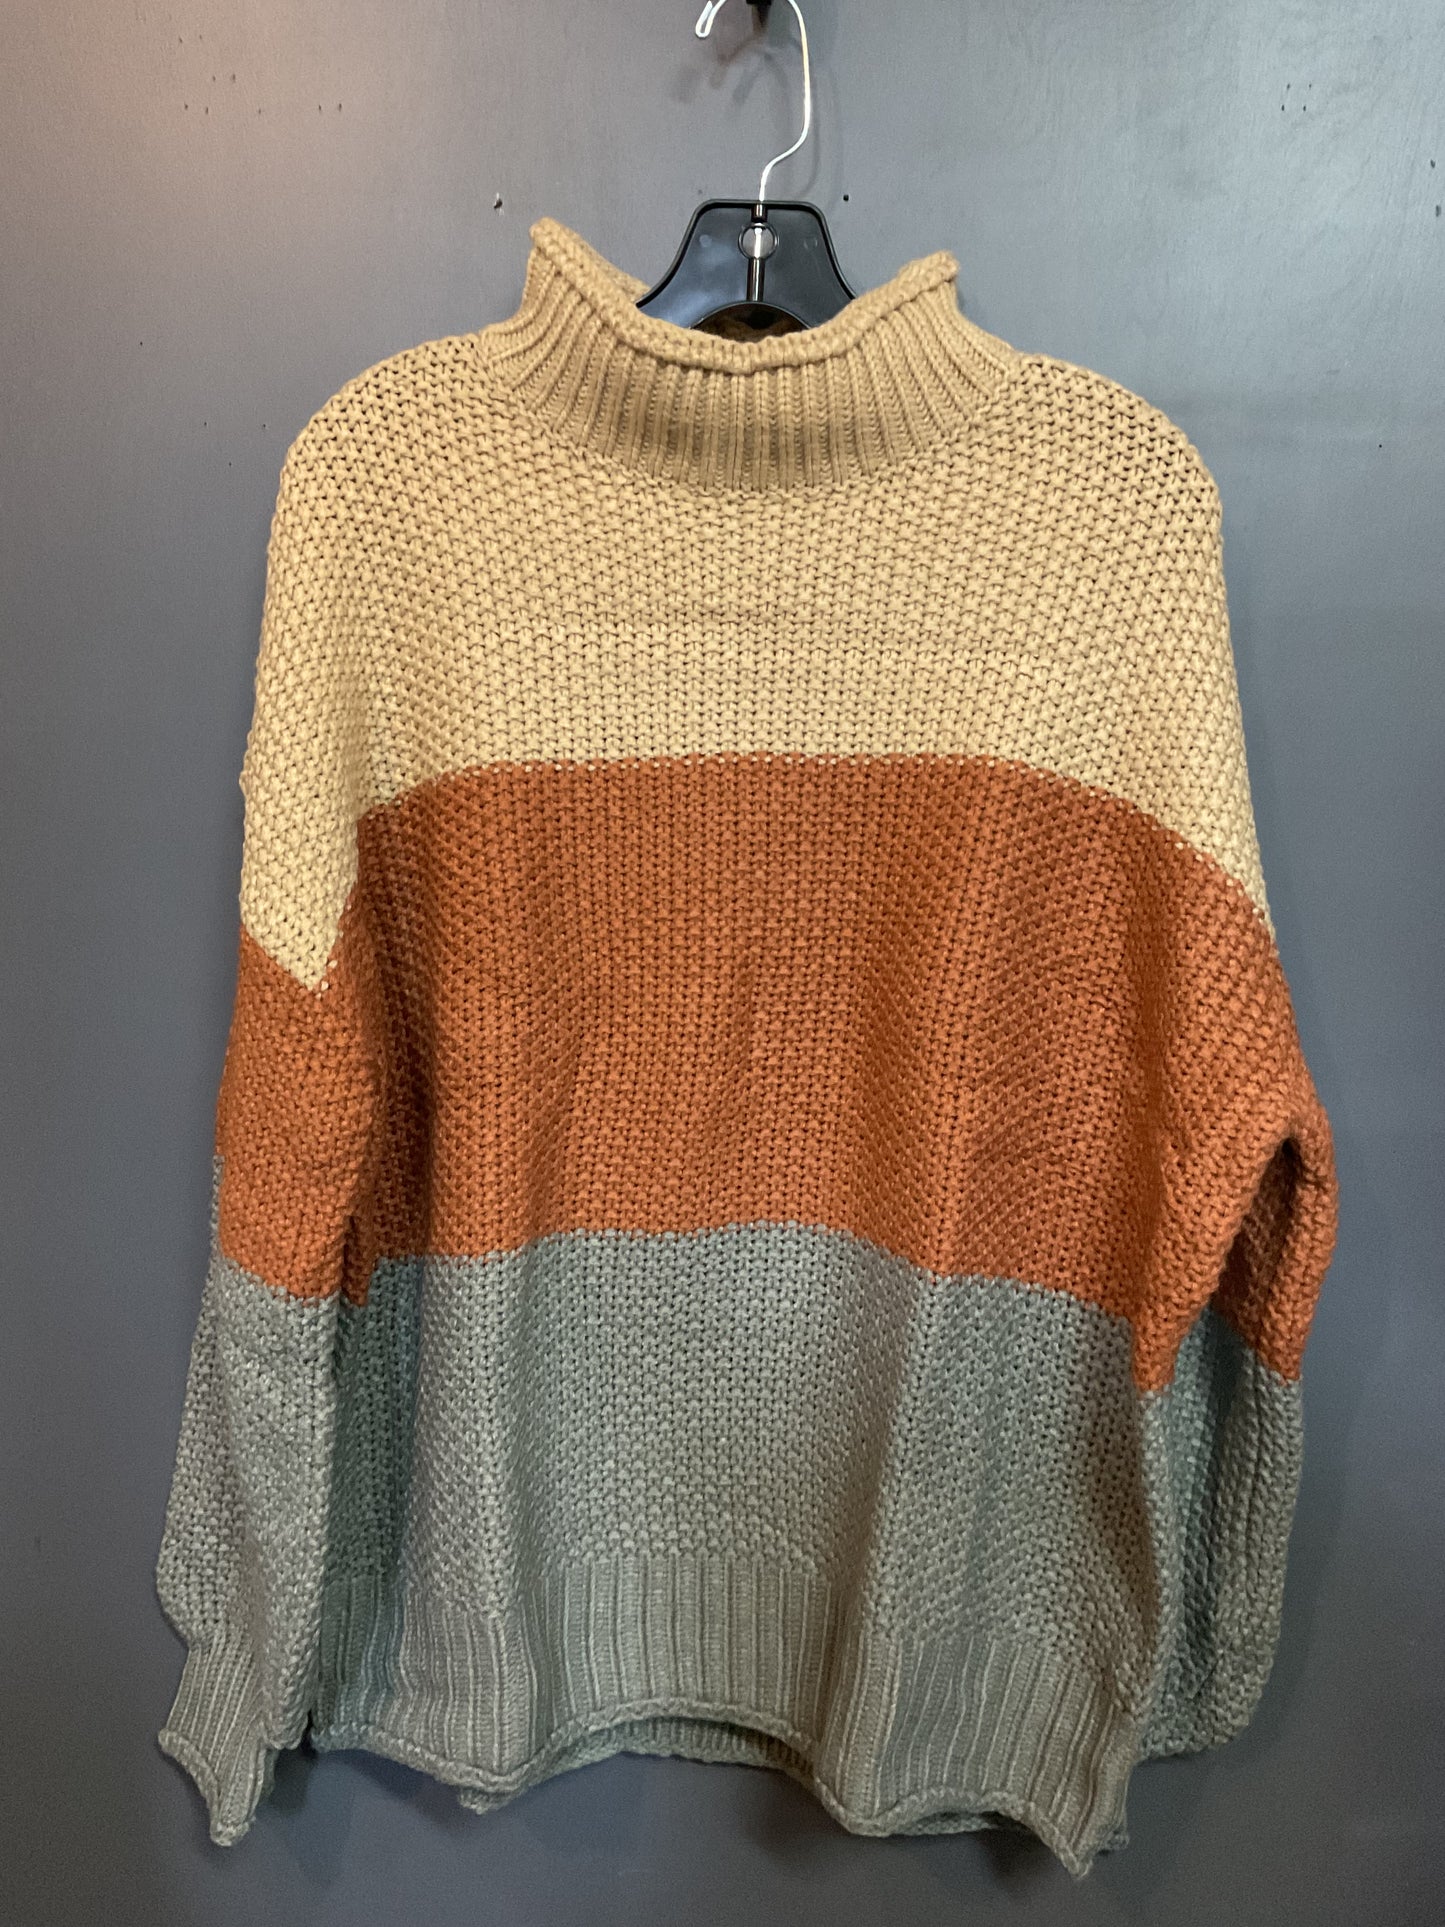 Acrylic Mock Turtleneck Knitted Color Block Sweater